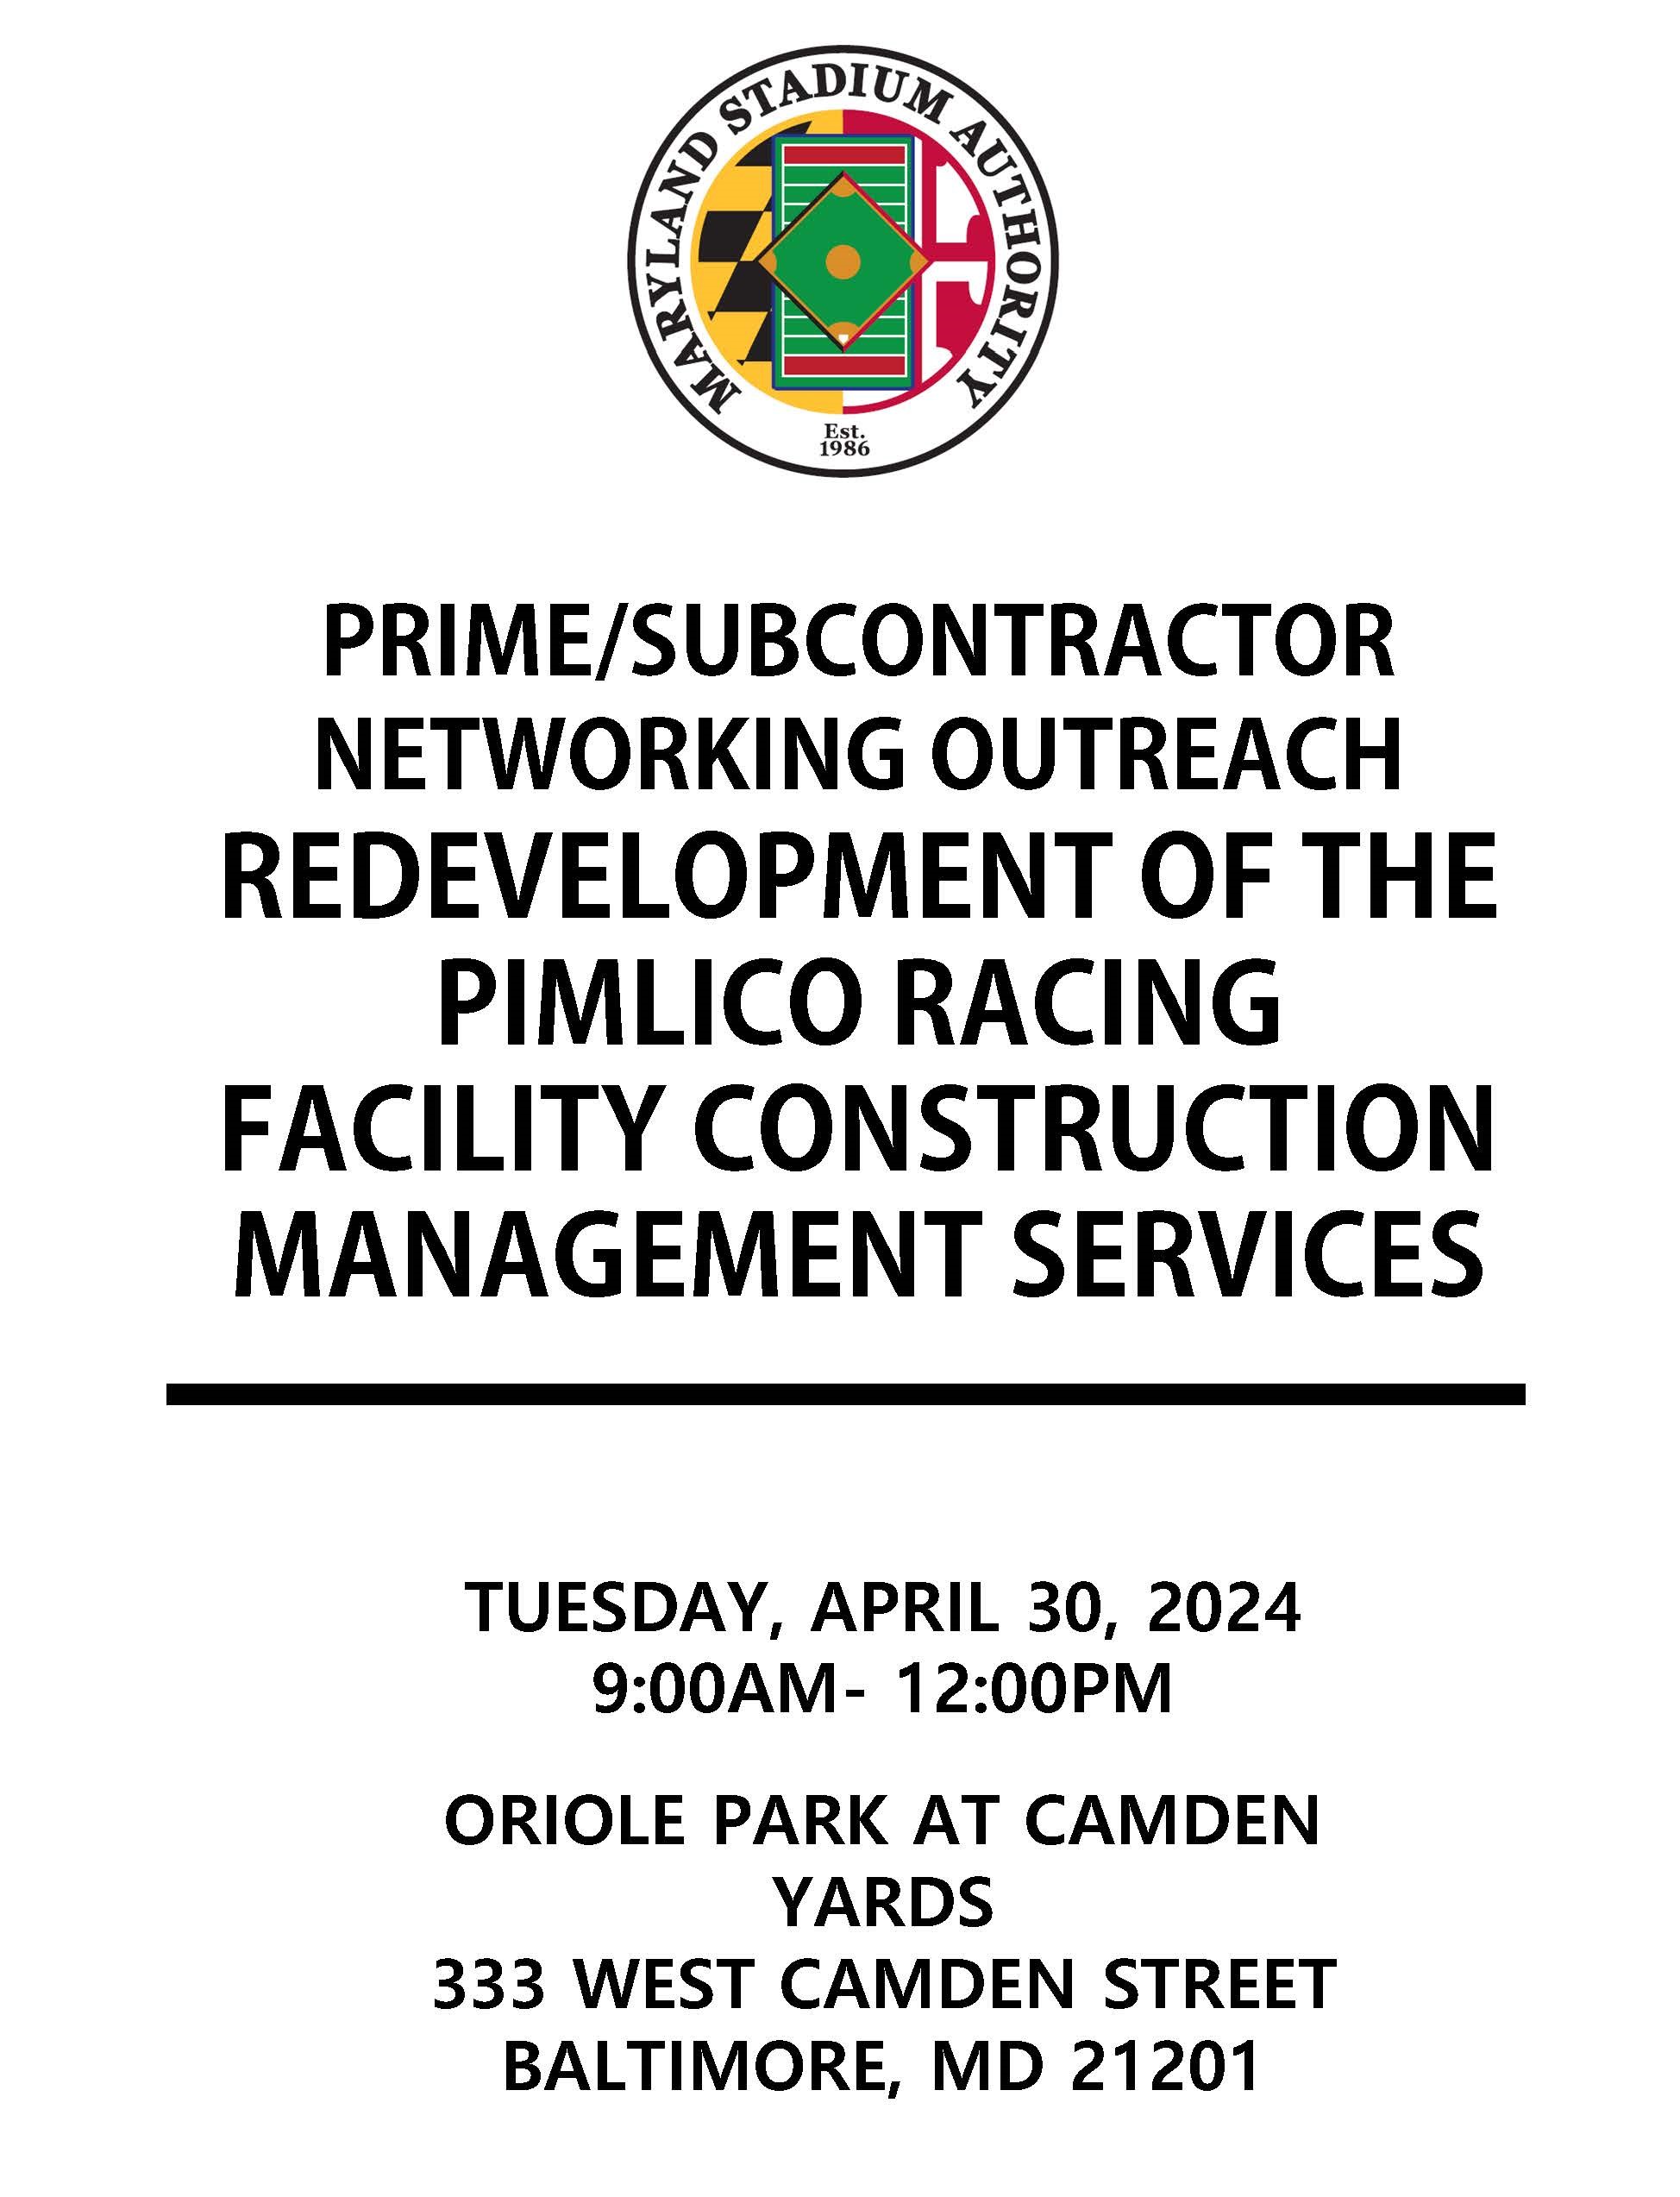 Redevelopment of the Pimlico Racing Facility Prime/Sub Networking Outreach